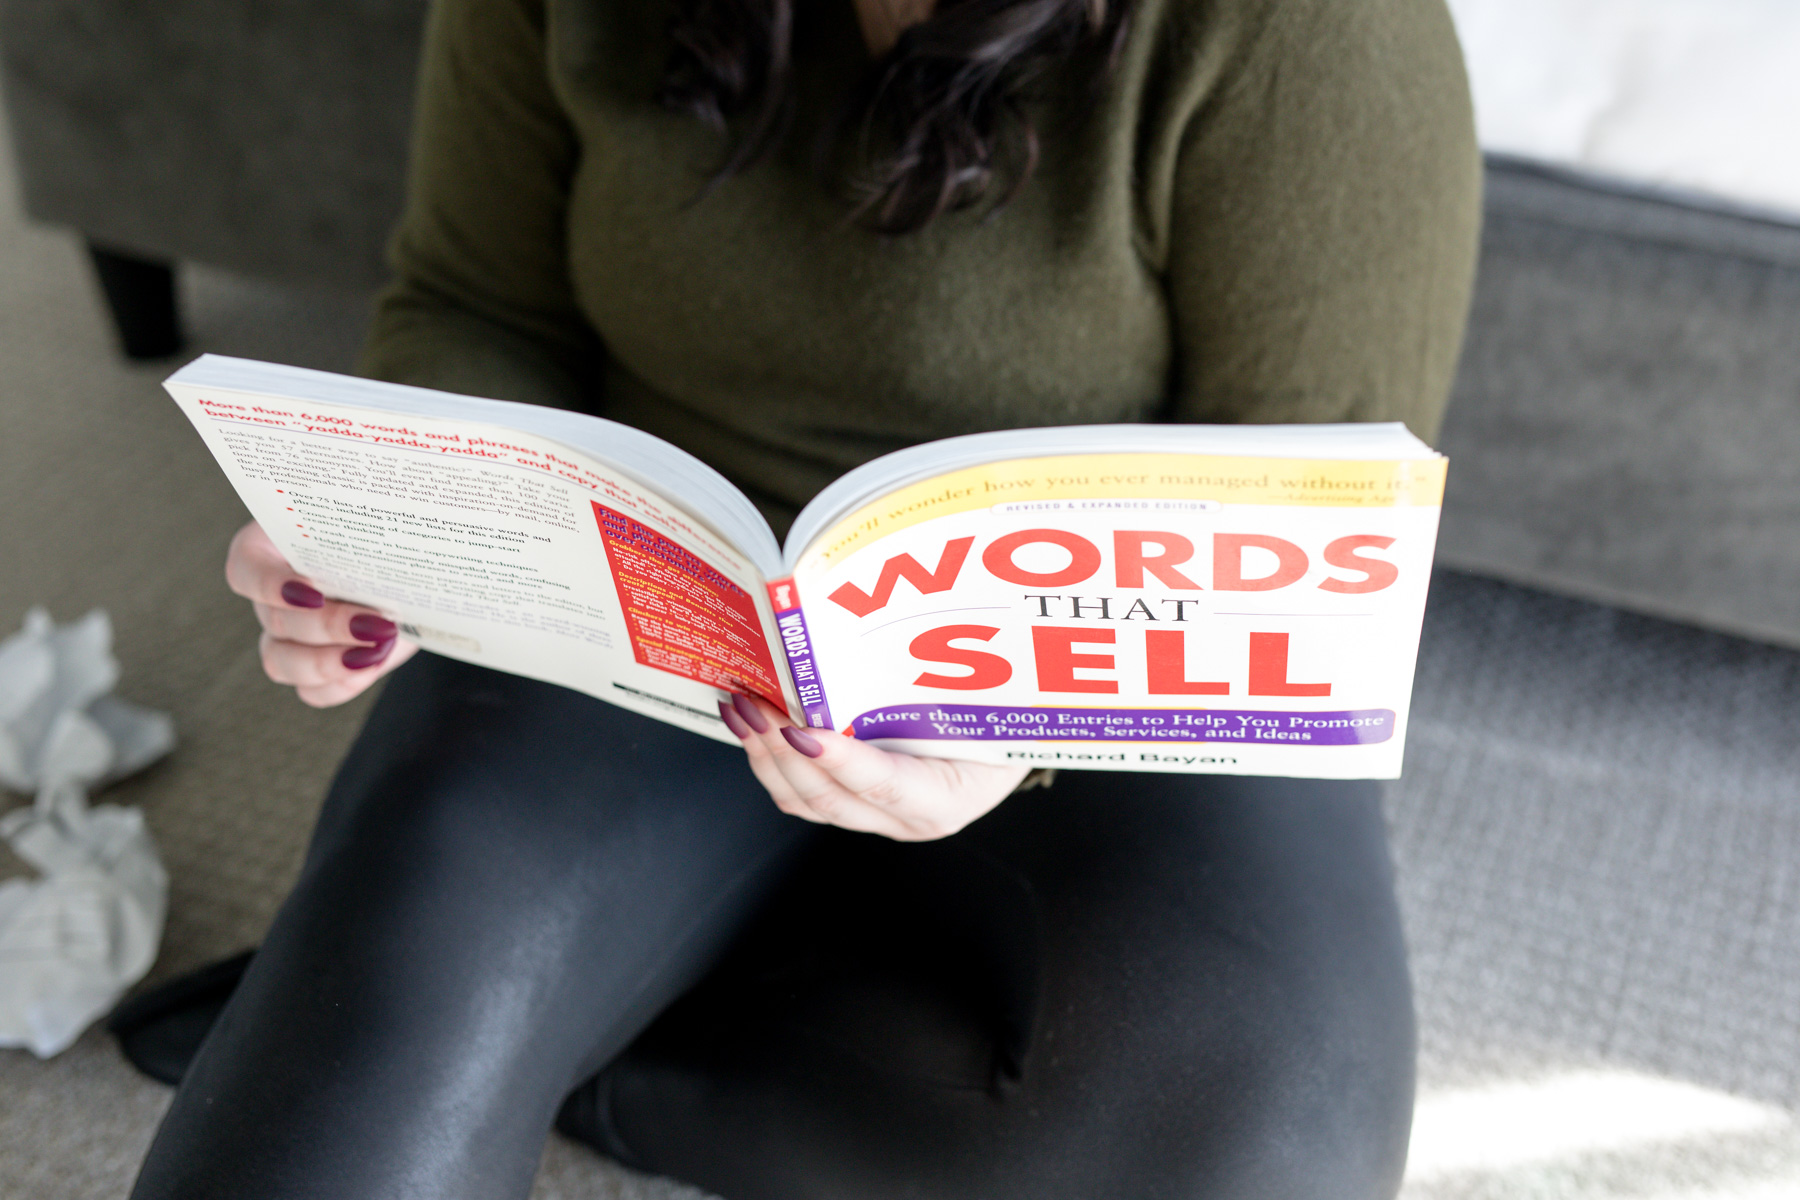 website copywriter shares tips for why a small business copywriter can help grow your online business through the book "words that sell"